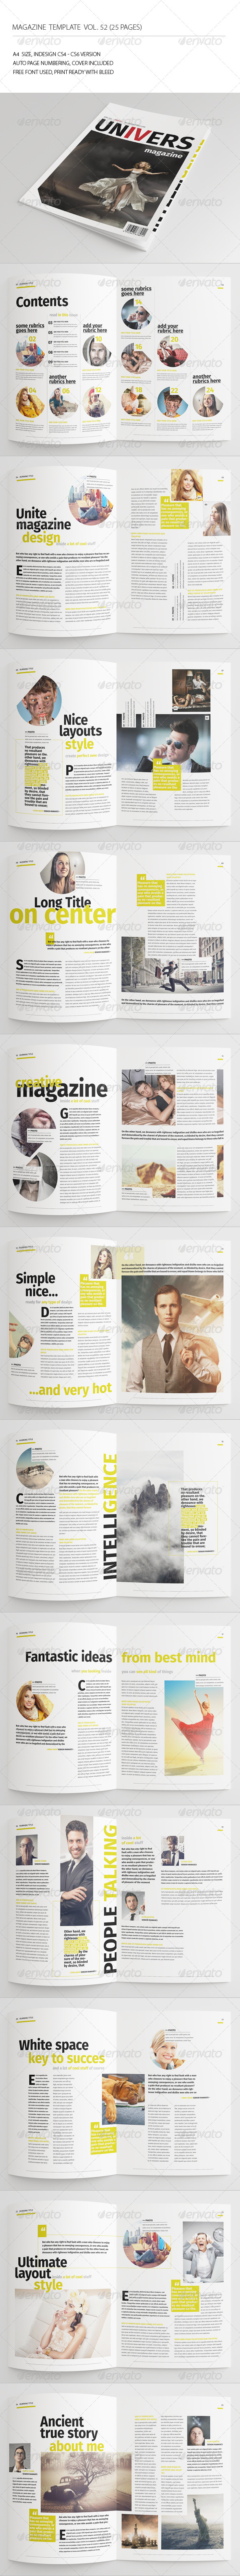 GraphicRiver 25 Pages Universal Magazine Vol52 7700669